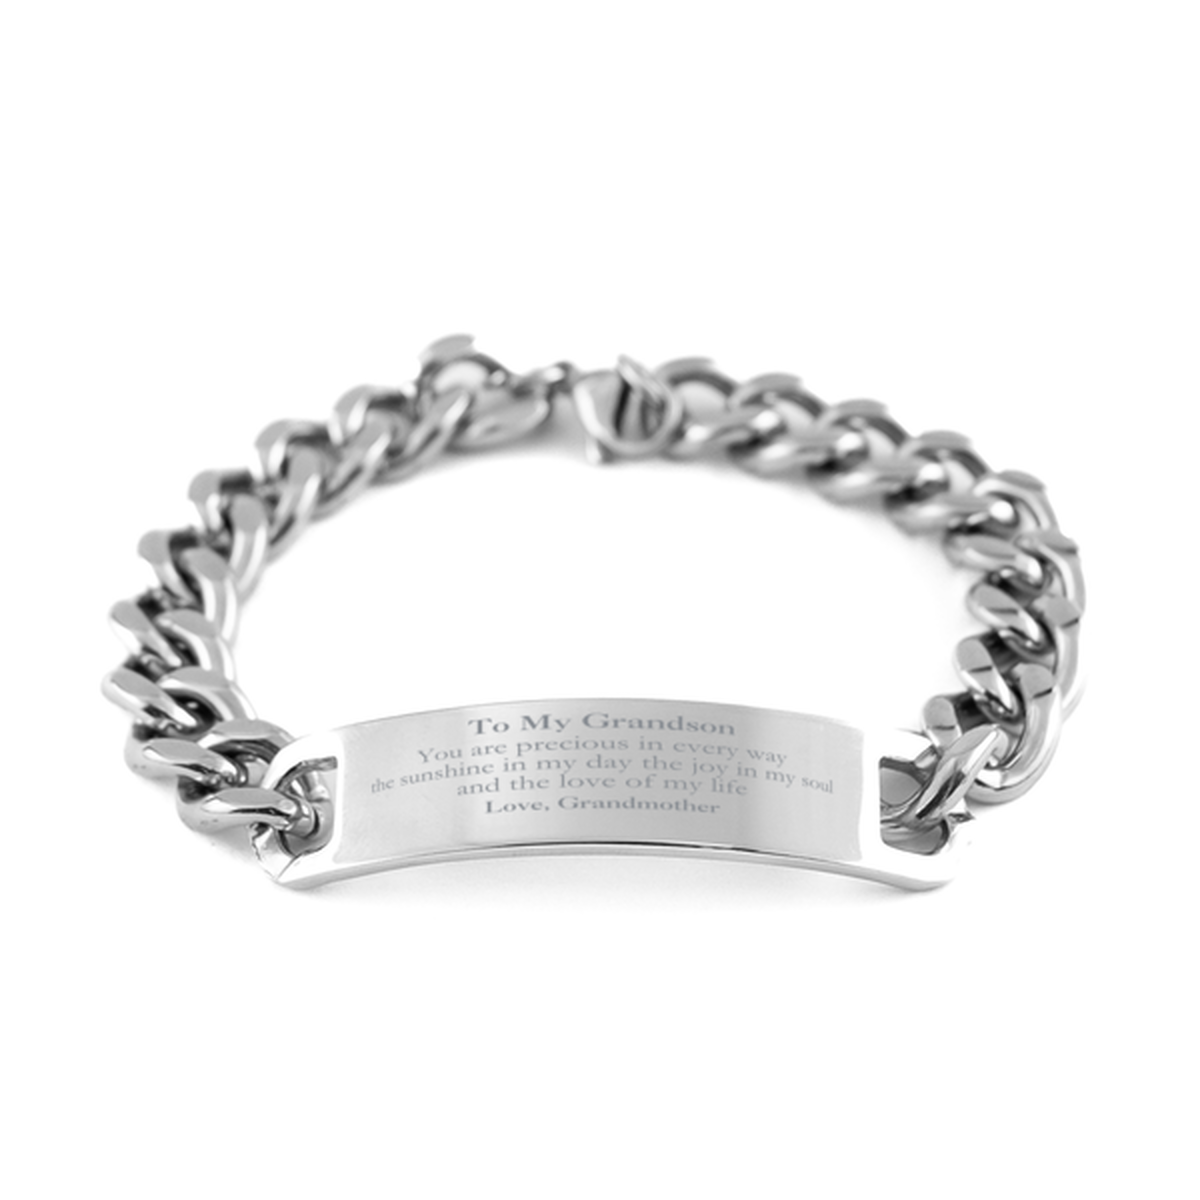 Graduation Gifts for Grandson Cuban Chain Stainless Steel Bracelet Present from Grandmother, Christmas Grandson Birthday Gifts Grandson You are precious in every way the sunshine in my day. Love, Grandmother